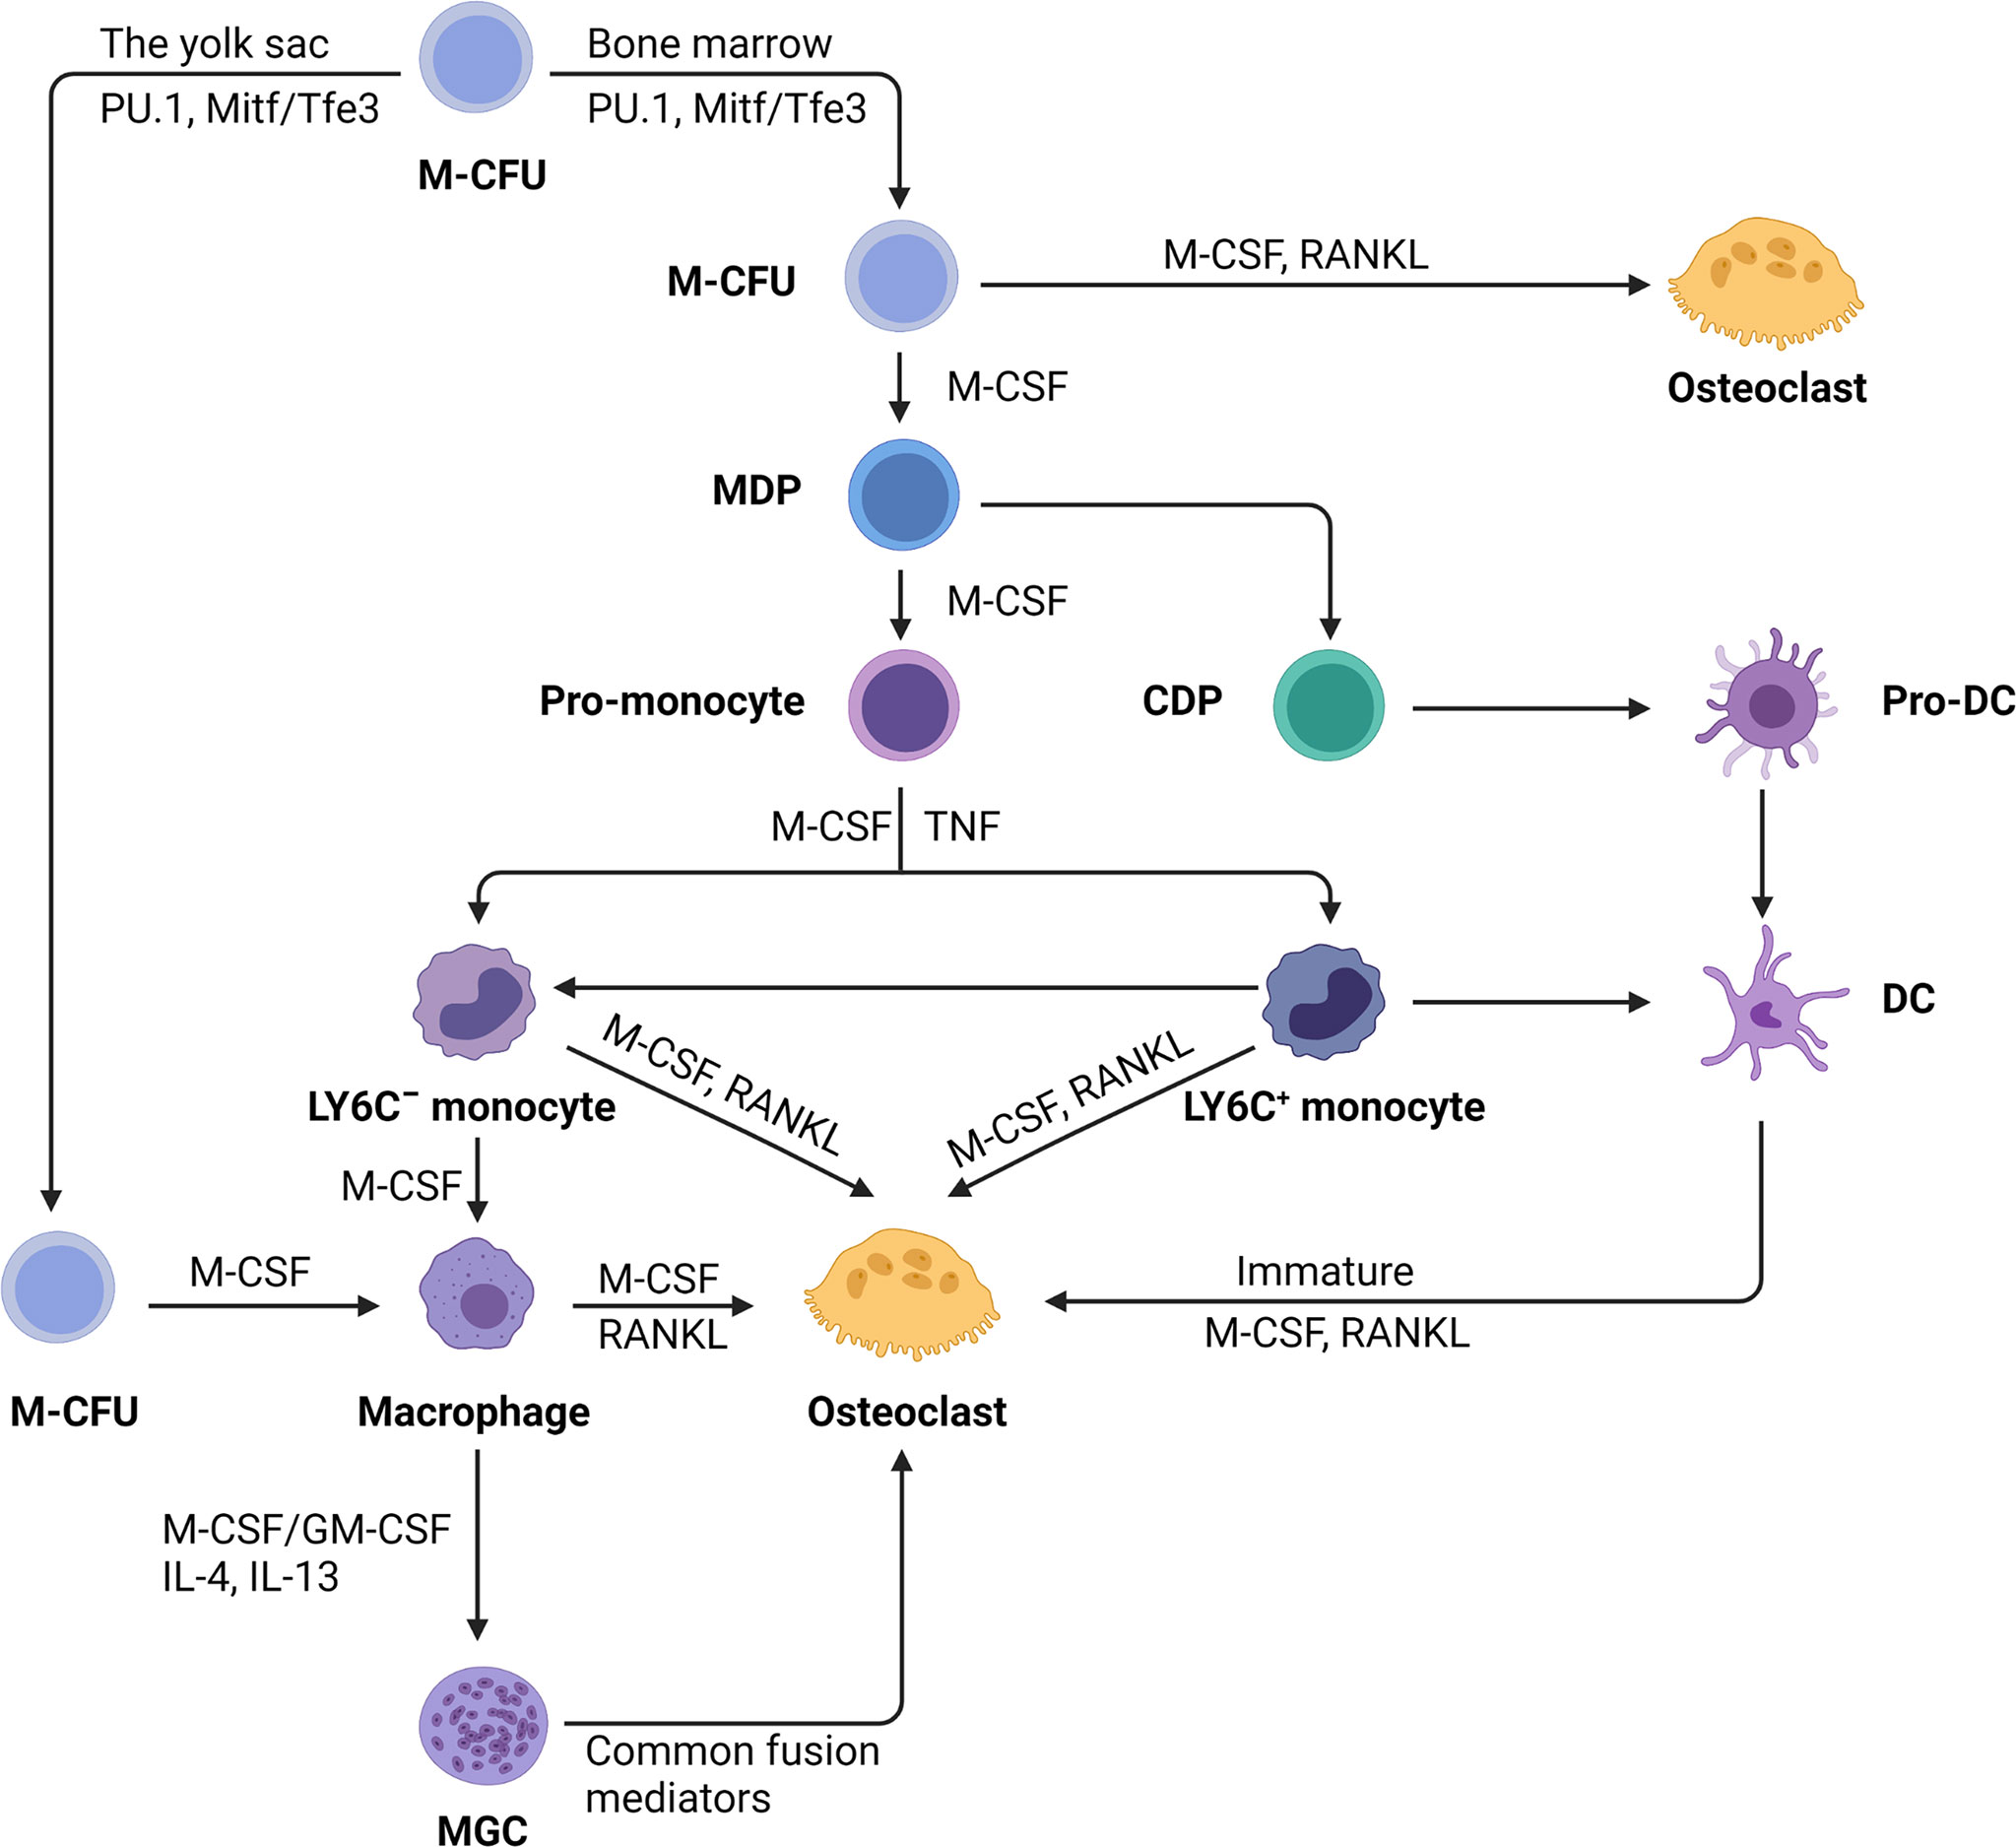 Origin of monocytes and macrophages in a committed progenitor